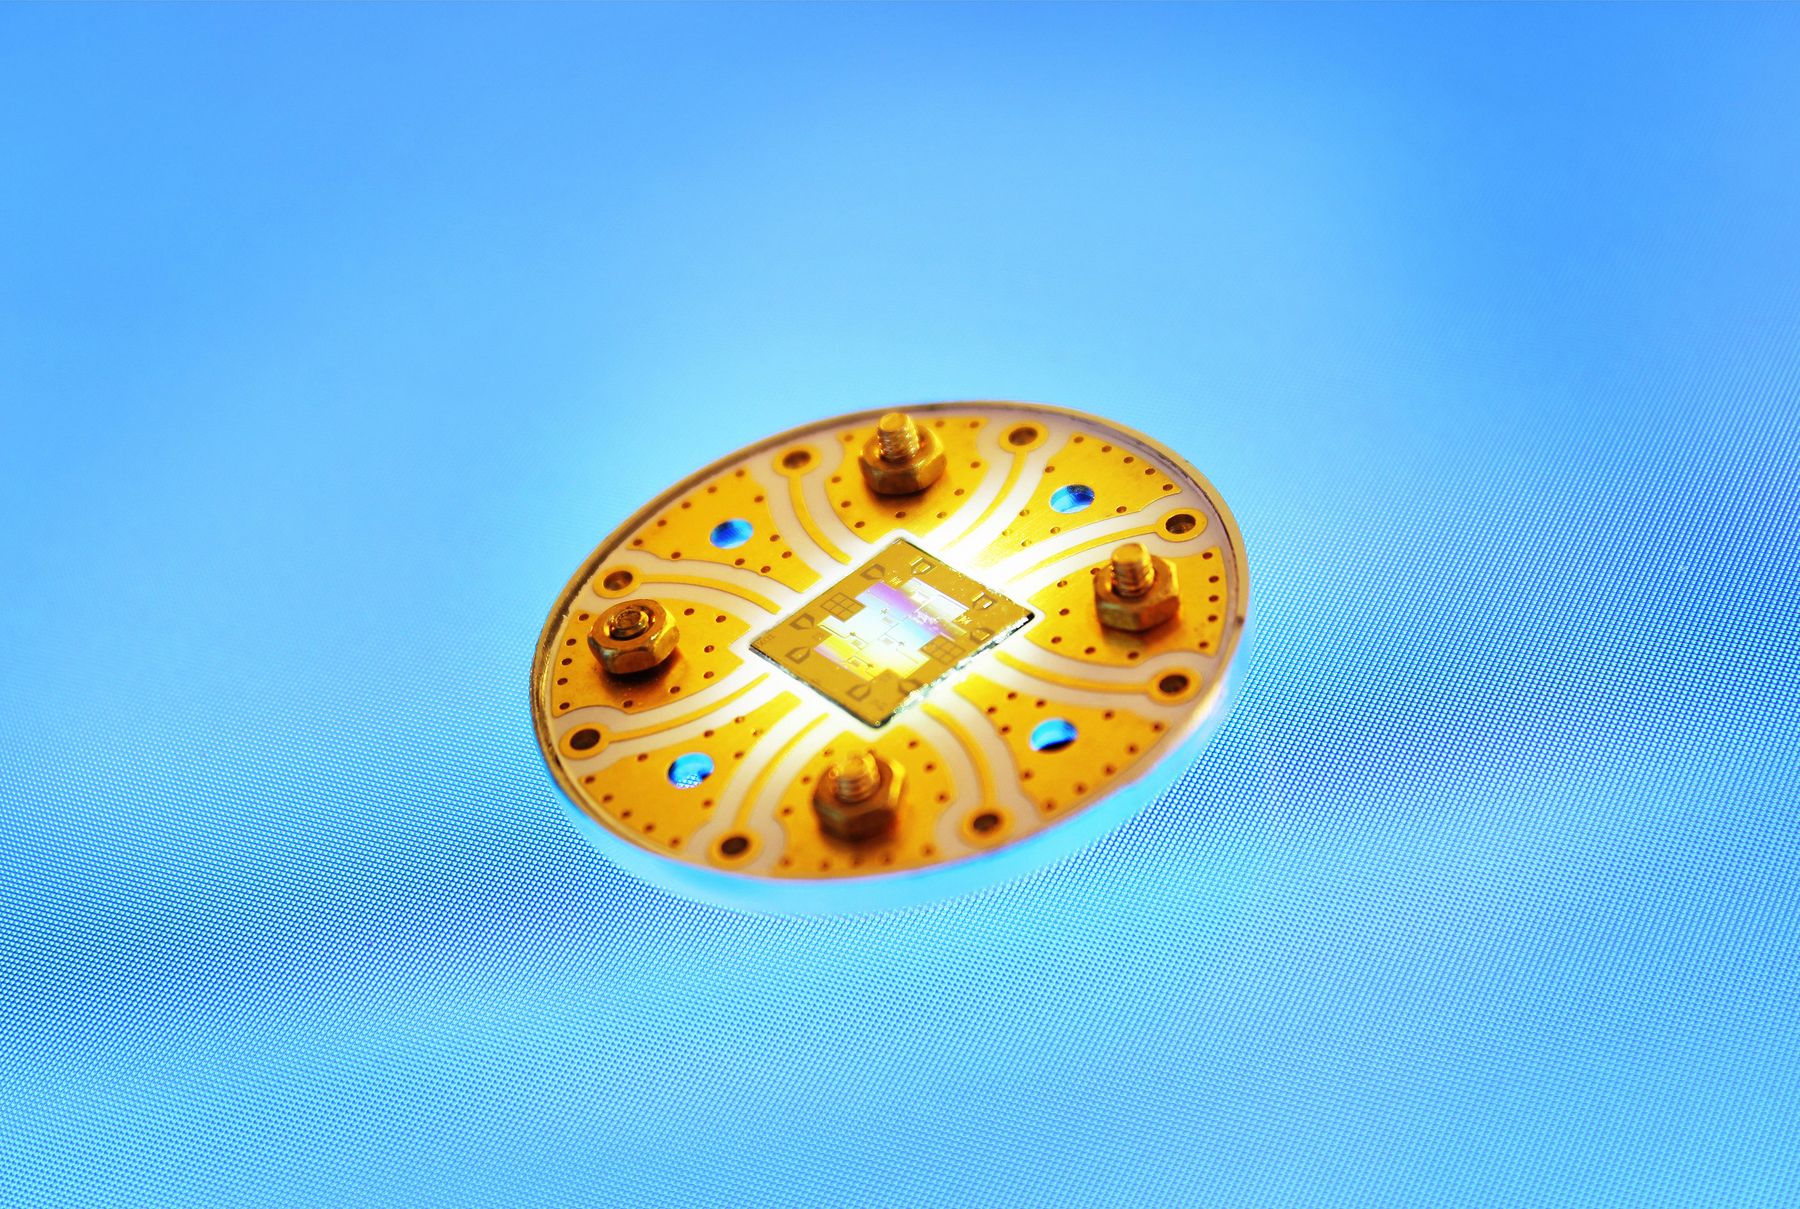 A circular gold quantum chip is illuminated on top of a blue background